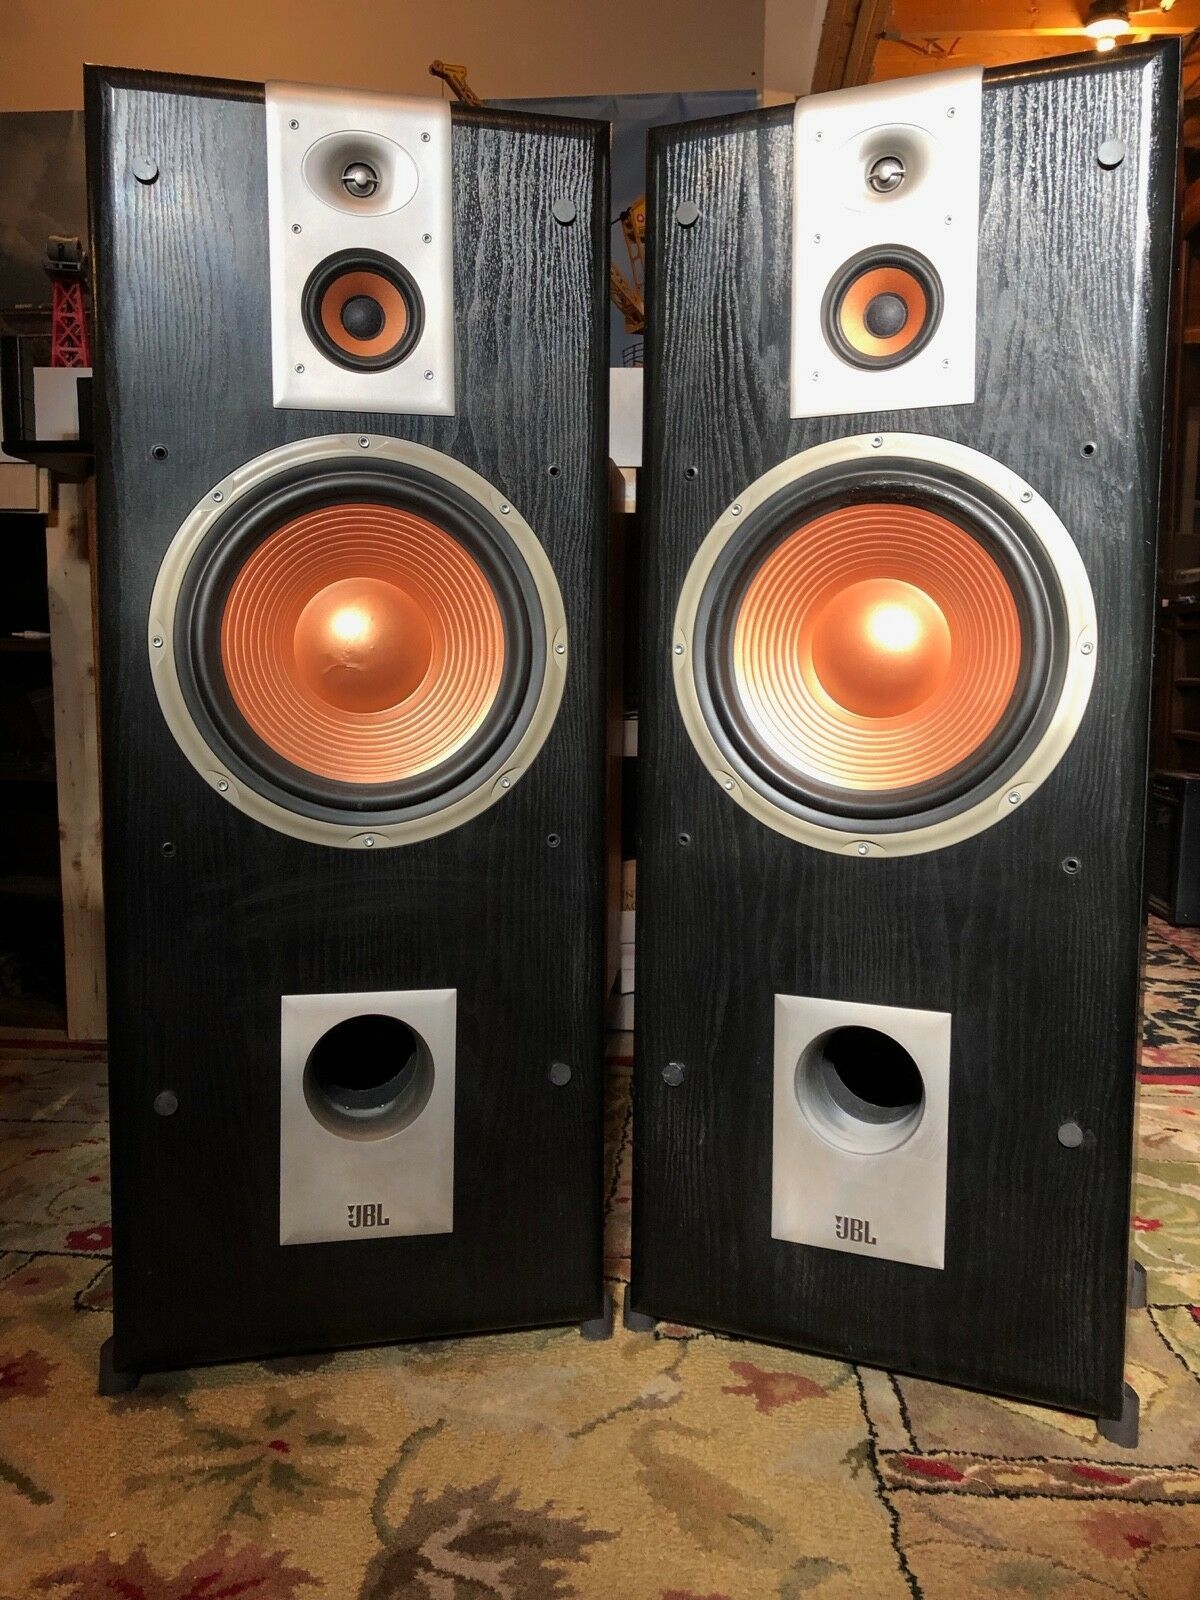 5 Photos Jbl Floor Speakers S312be And Review - Alqu Blog